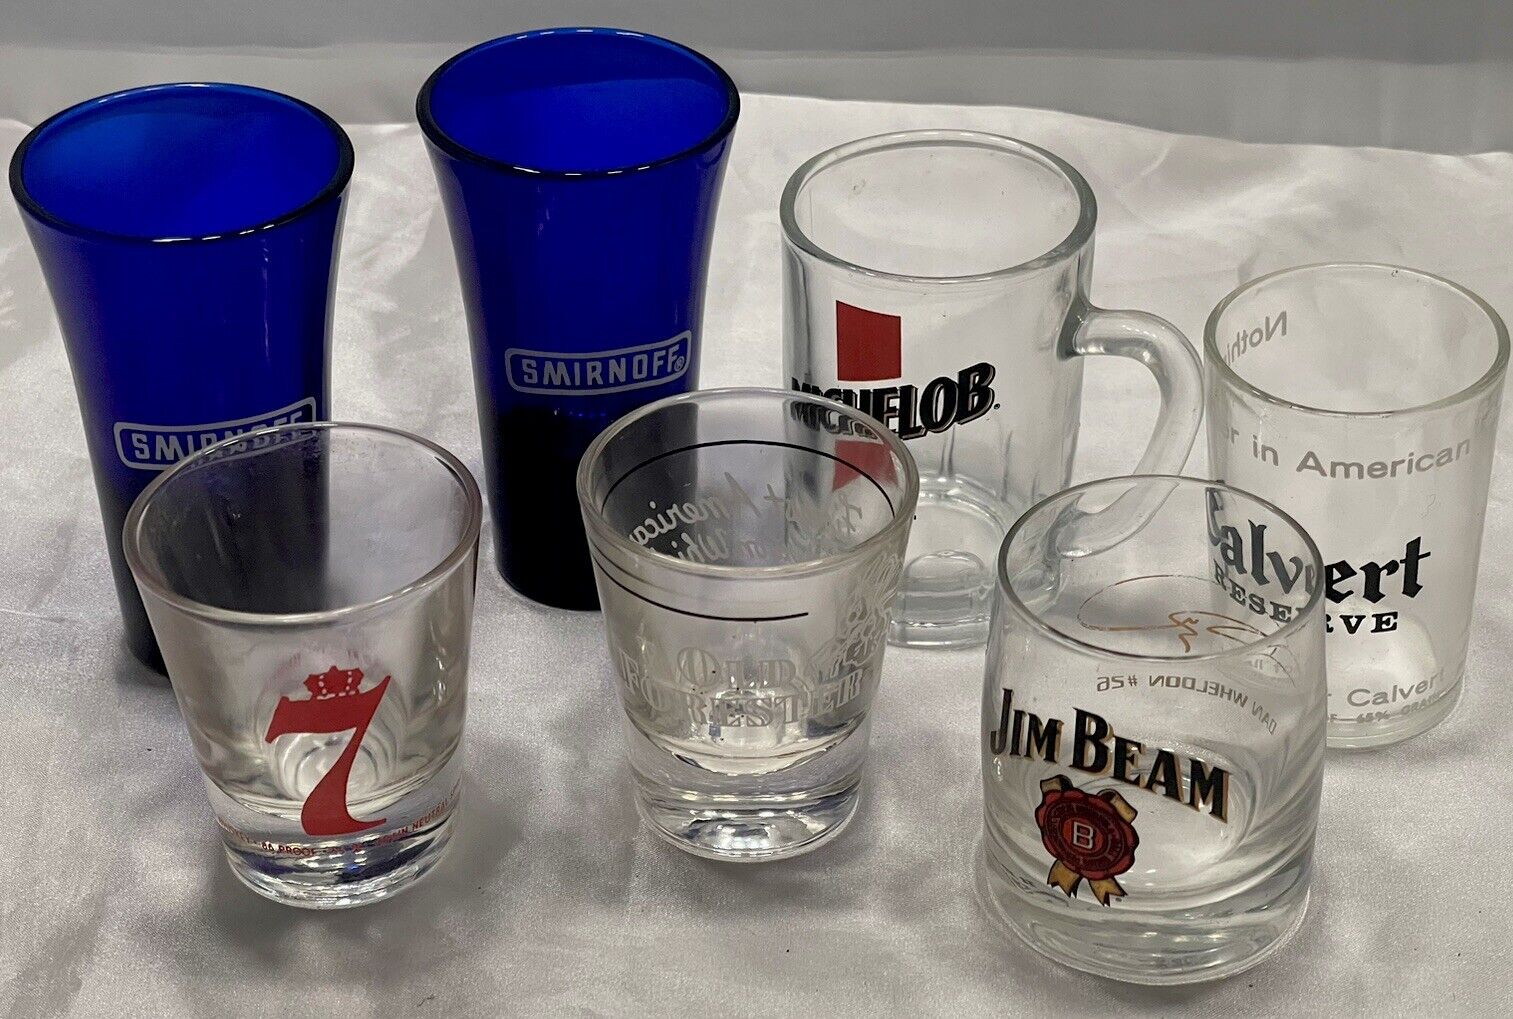 Lot Of 7 Souvenir Shot Glasses Collectibles Liquor/Beer For Man Cave Or Display